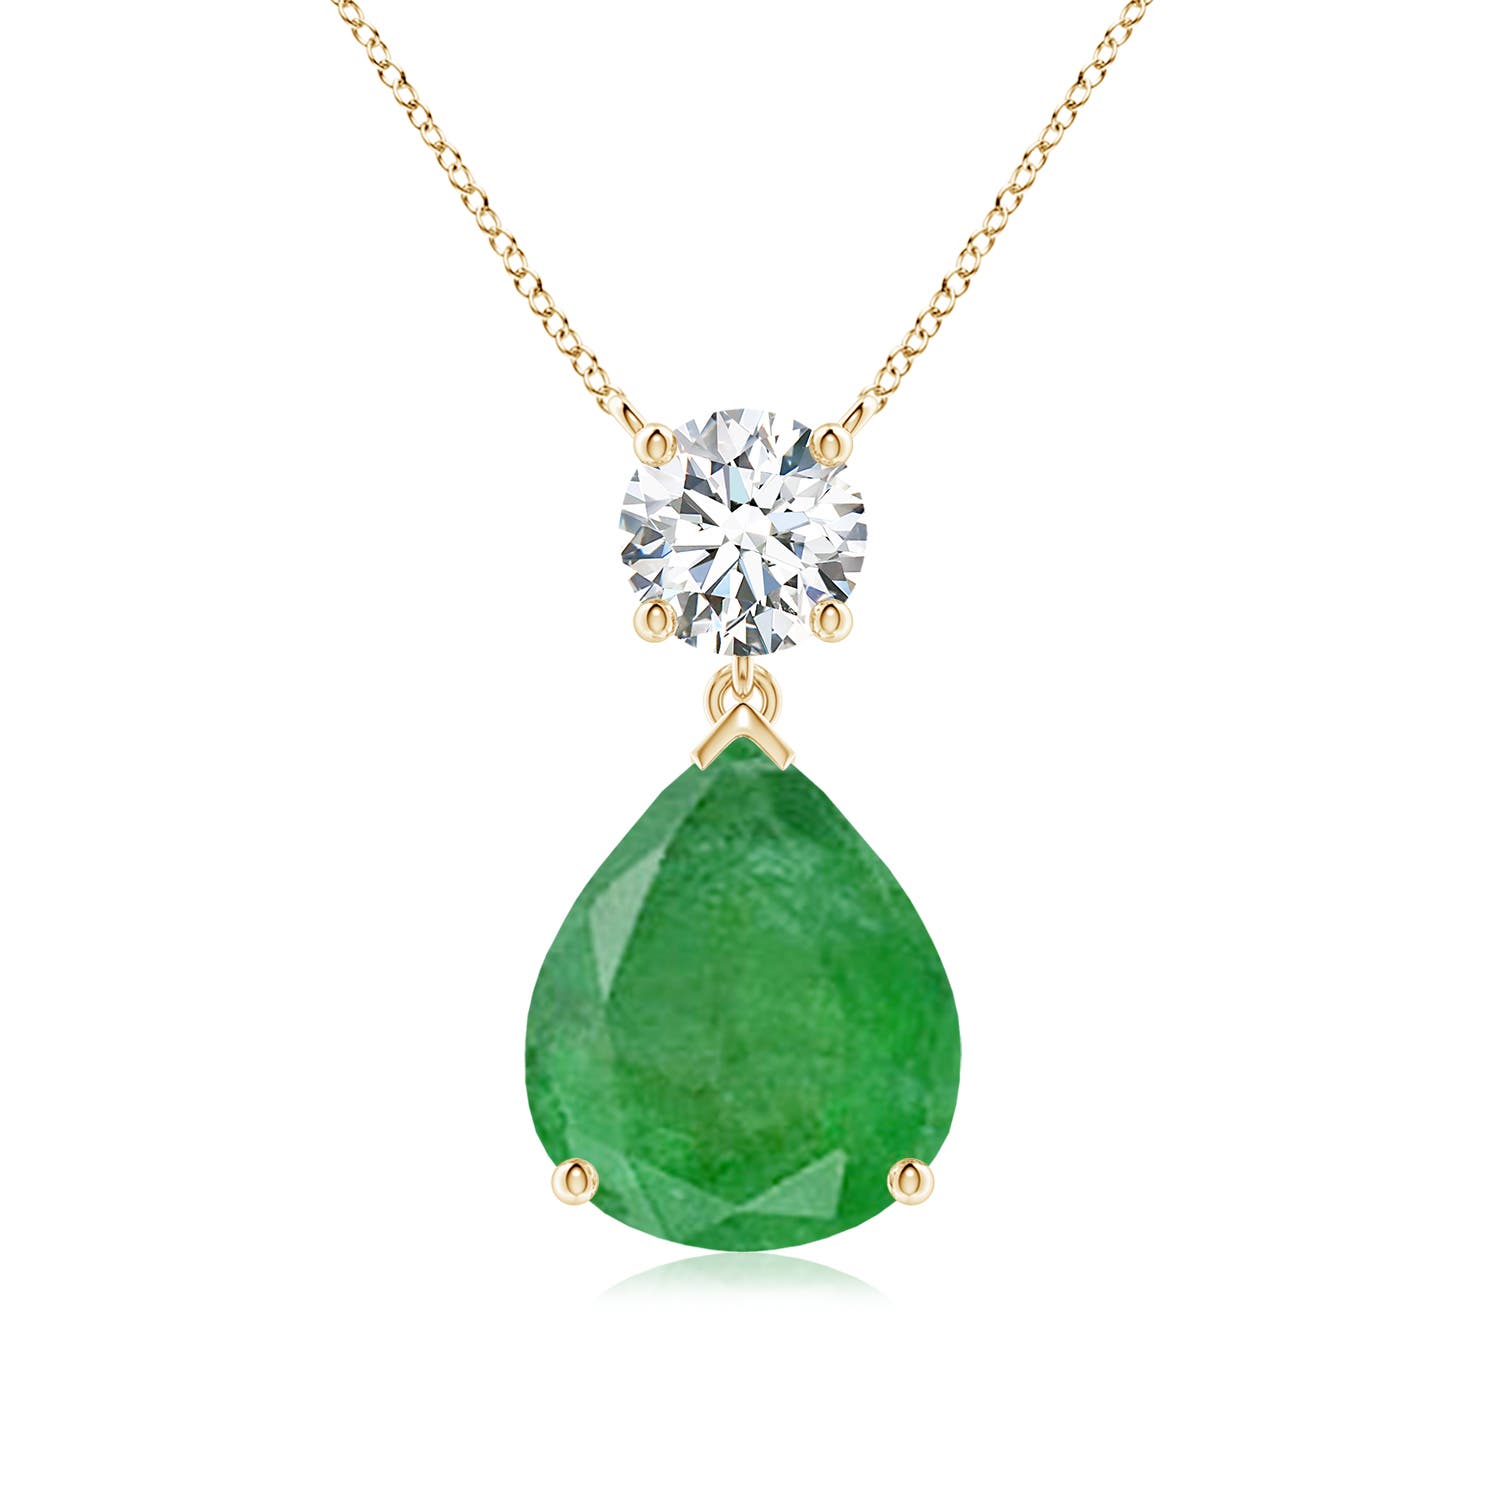 A - Emerald / 5.21 CT / 14 KT Yellow Gold